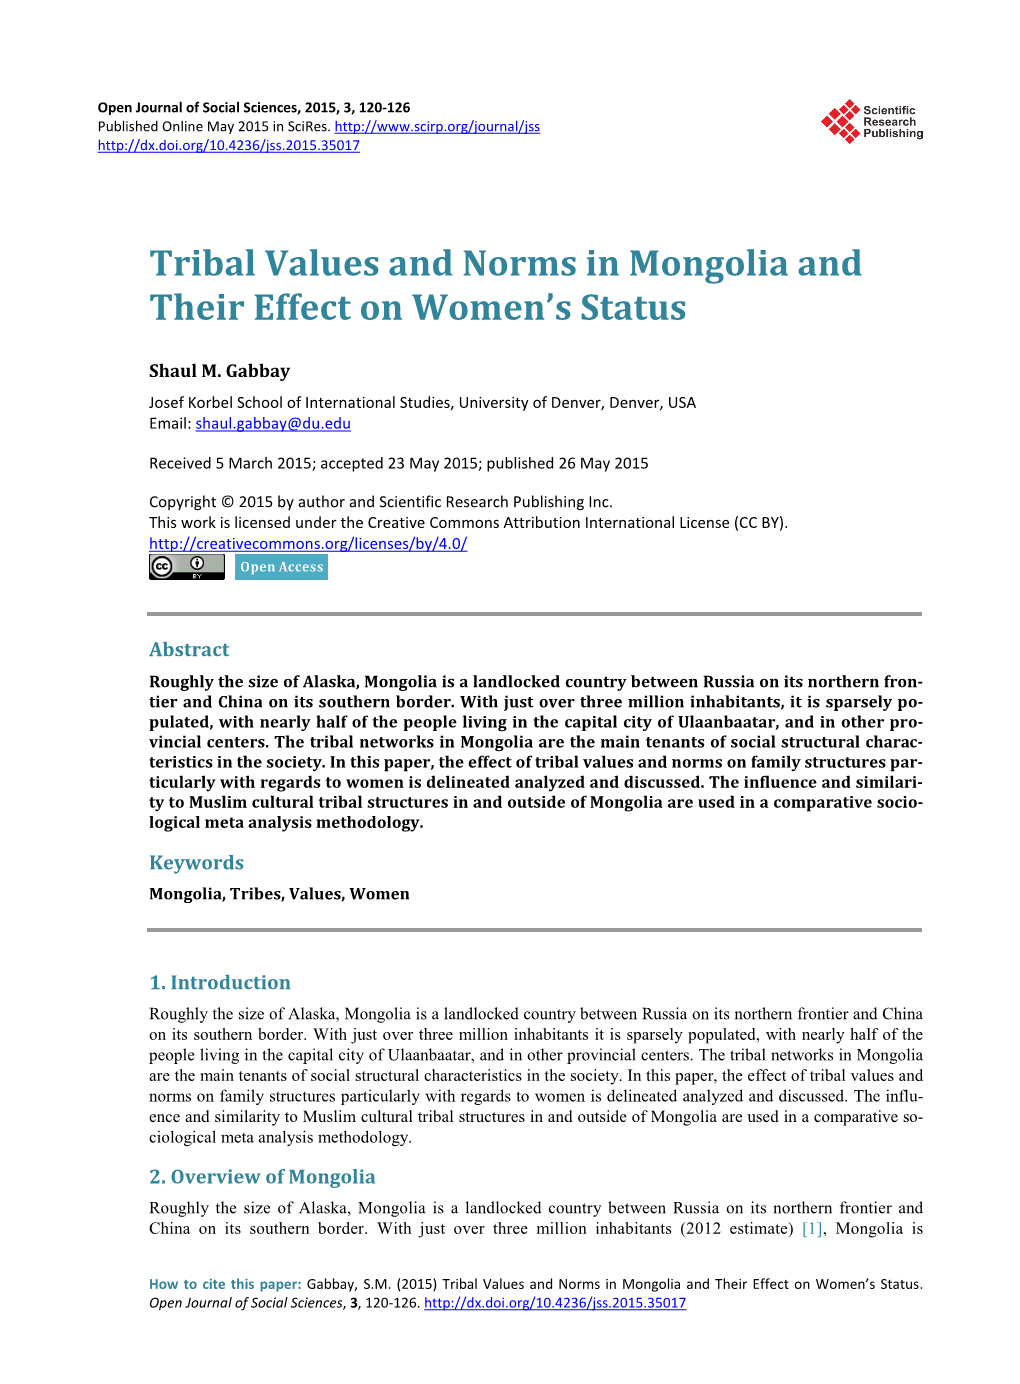 Tribal Values and Norms in Mongolia and Their Effect on Women's Status